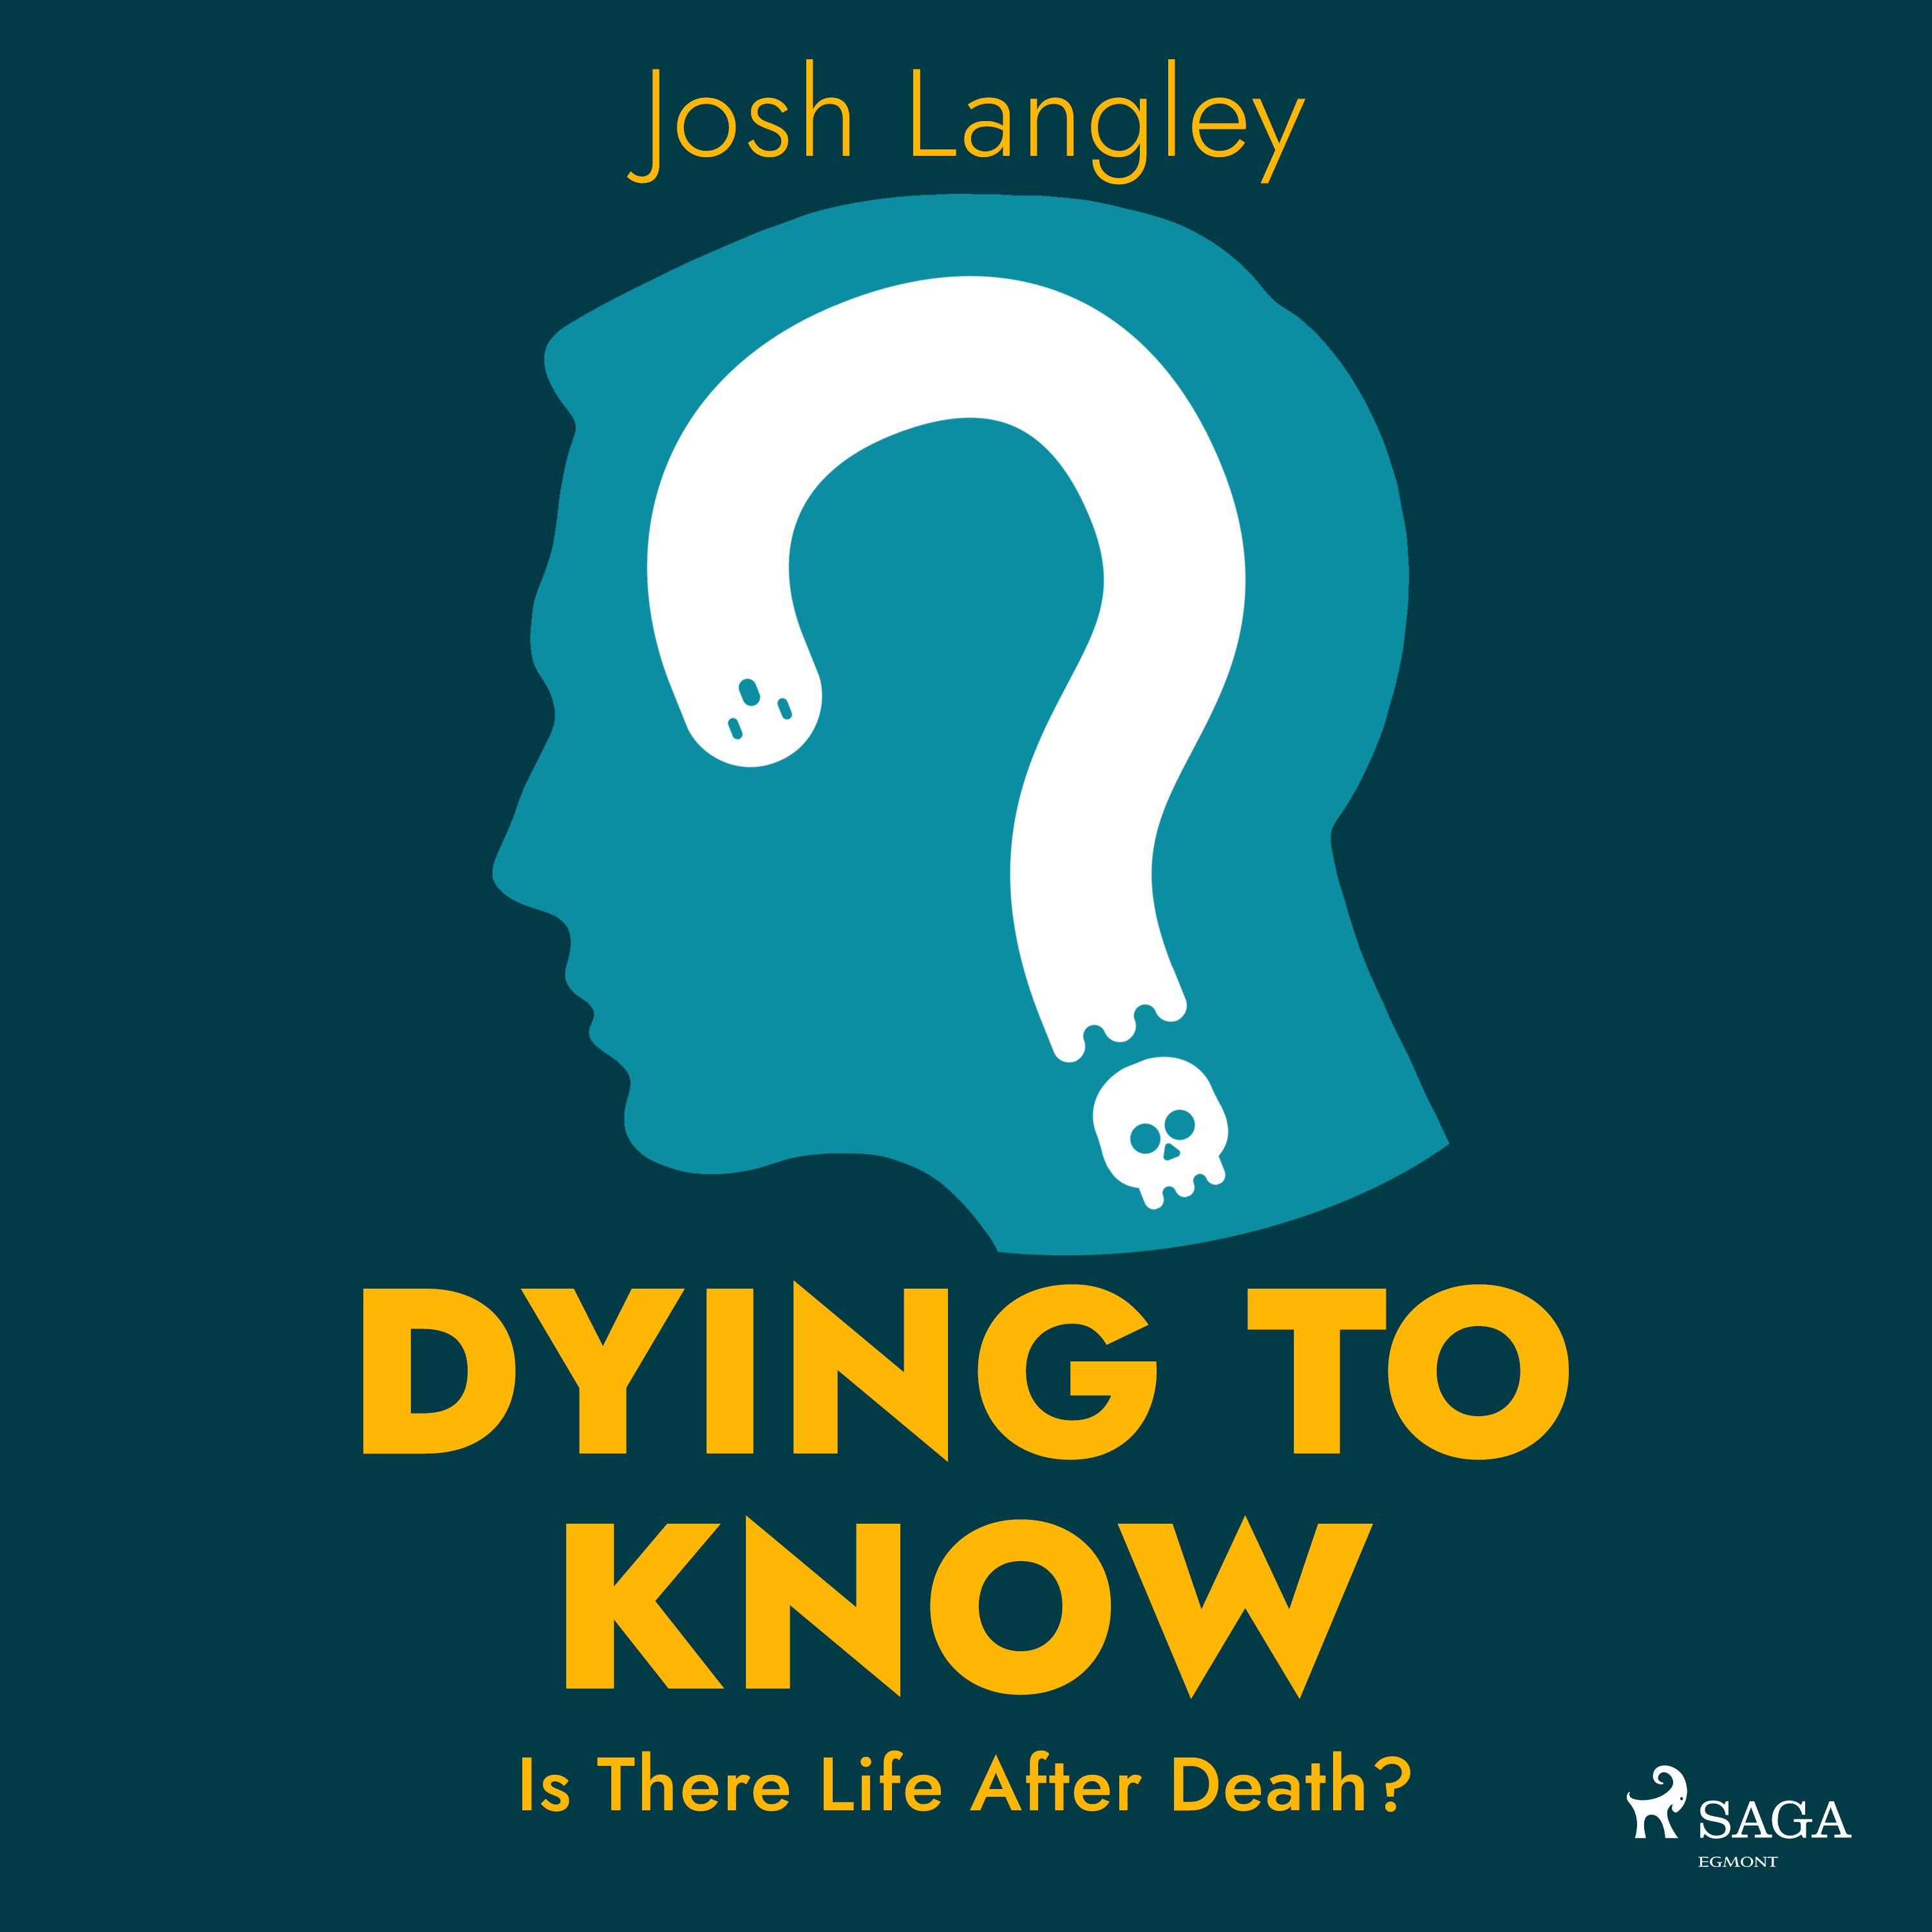 Dying to Know: Is There Life After Death?, ljudbok av Josh Langley